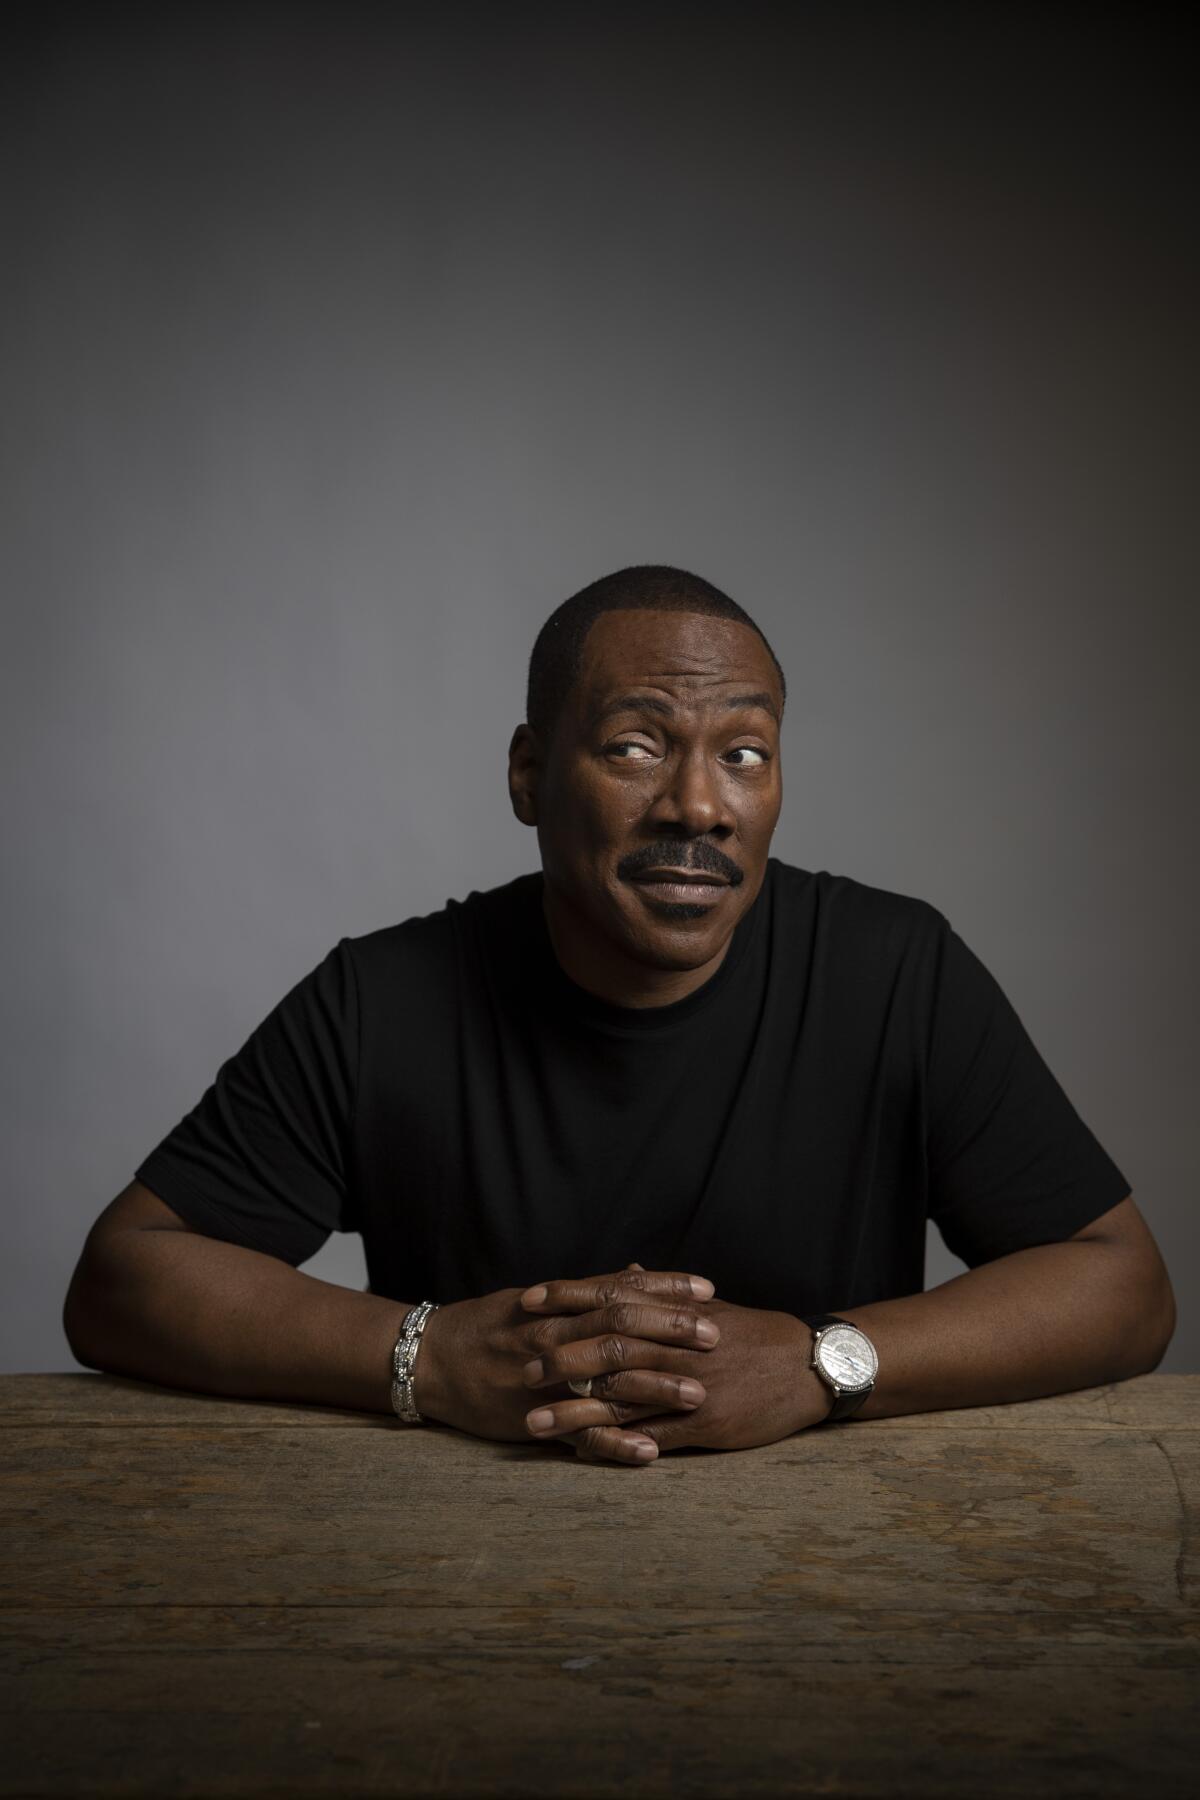 Eddie Murphy is earning Oscar buzz for "Dolemite Is My Name."